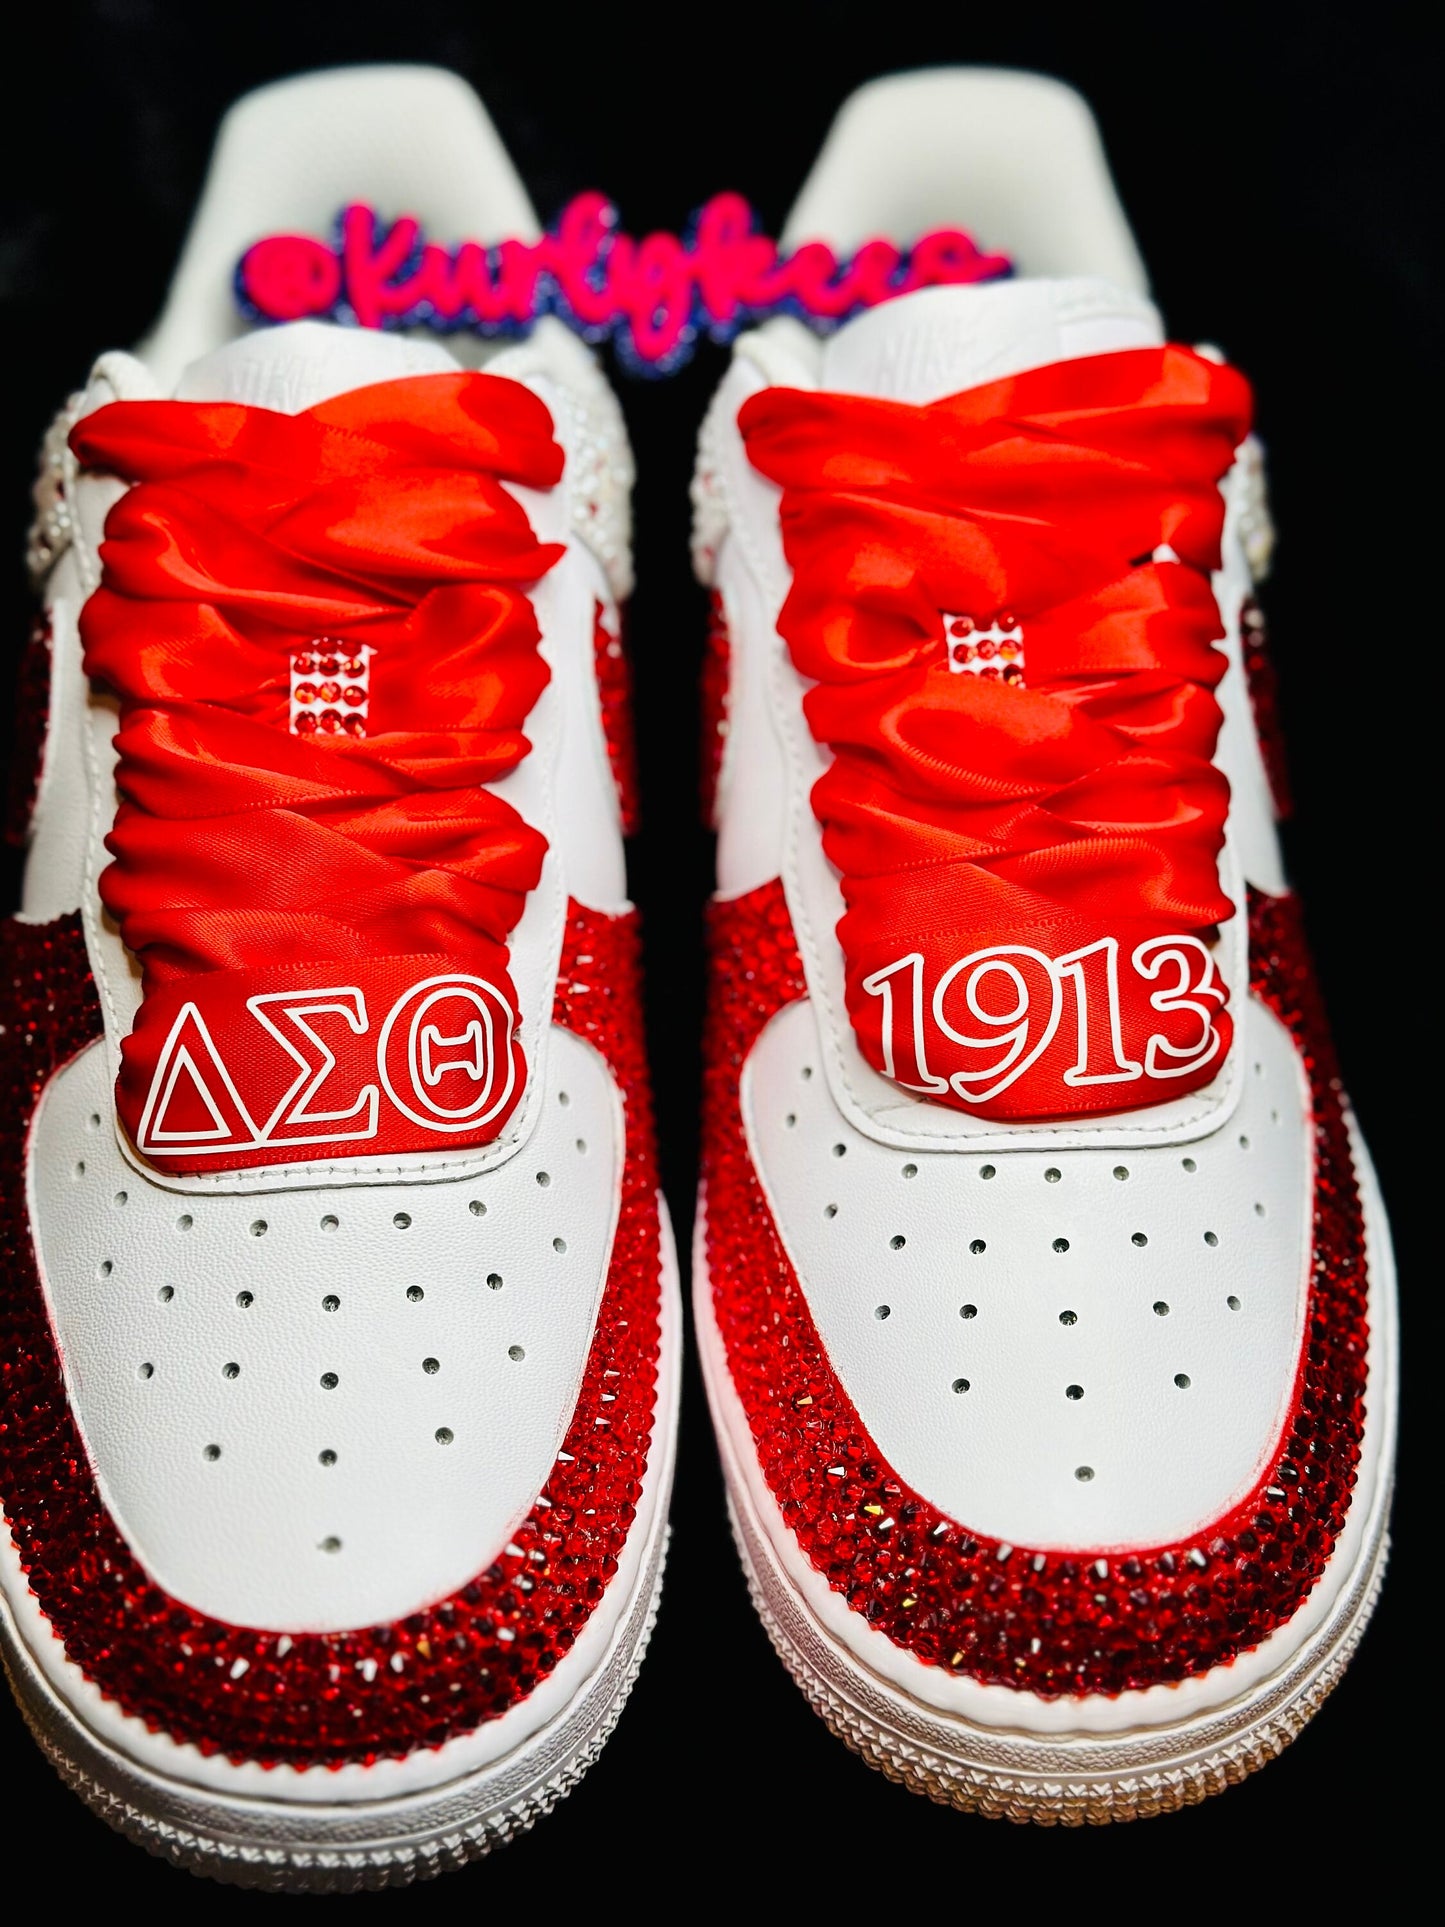 Custom Delta Air Force Ones/ Customizable/ Add any sorority or theme/ Authentic Nike Shoes